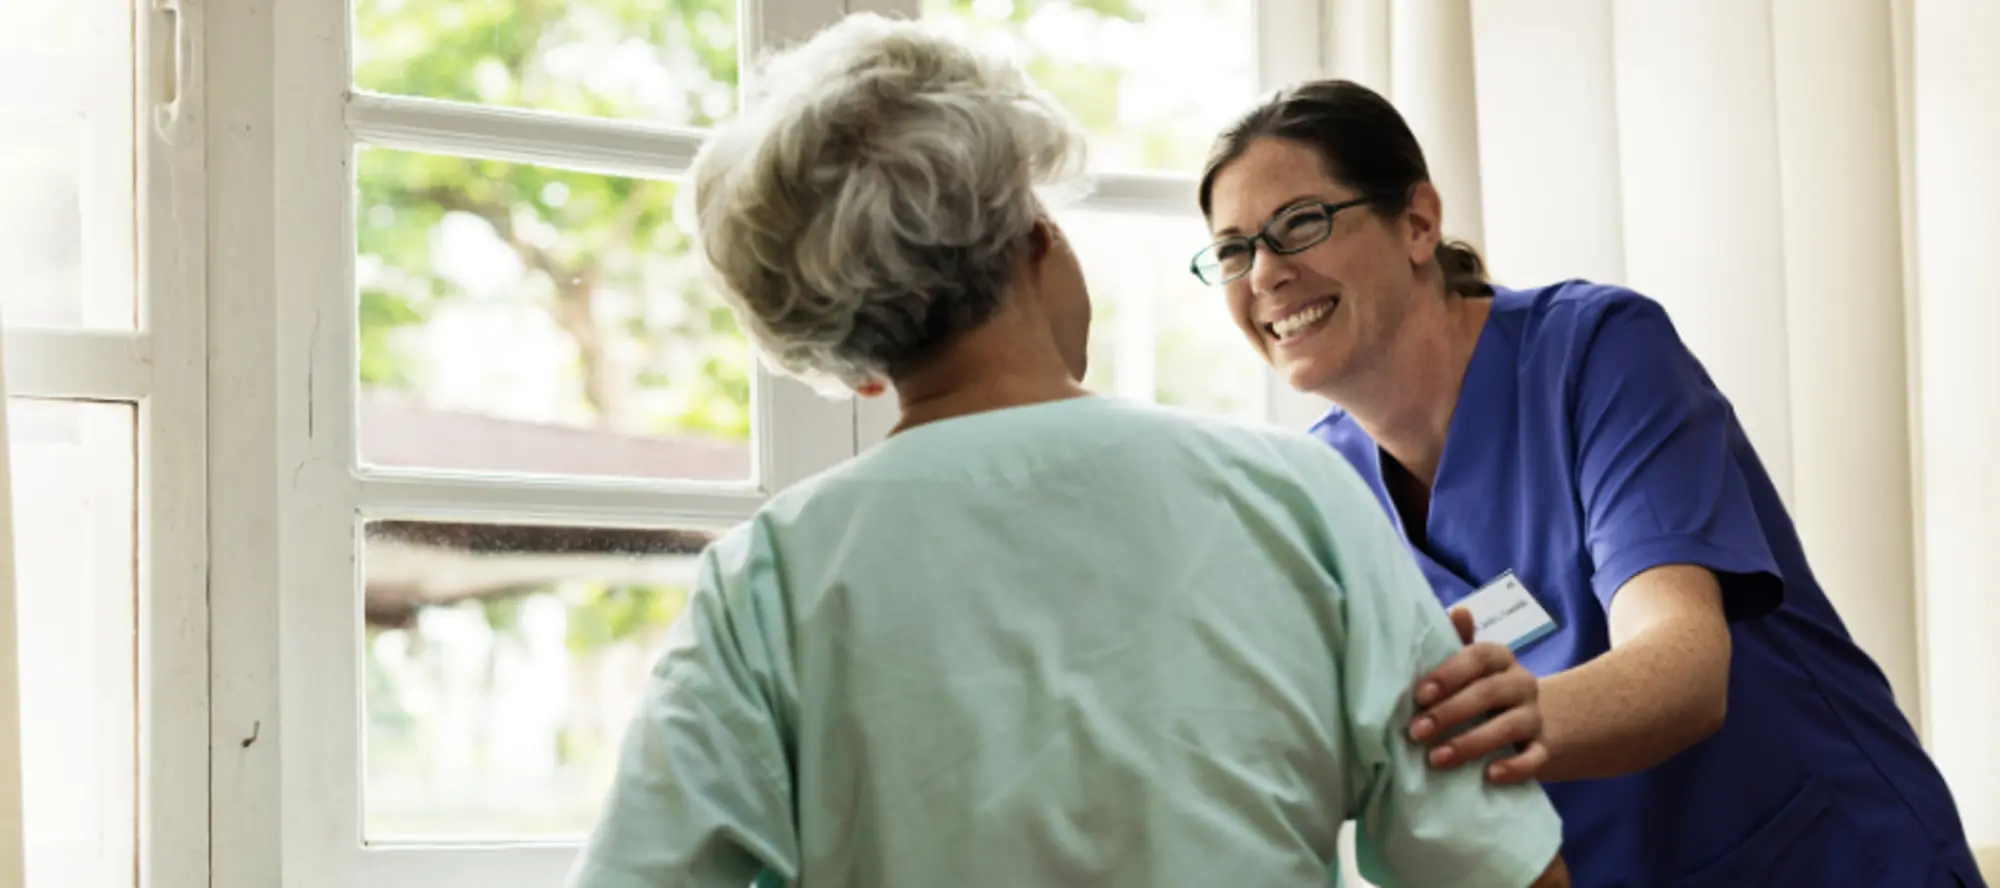 Building rapport with an elderly patient